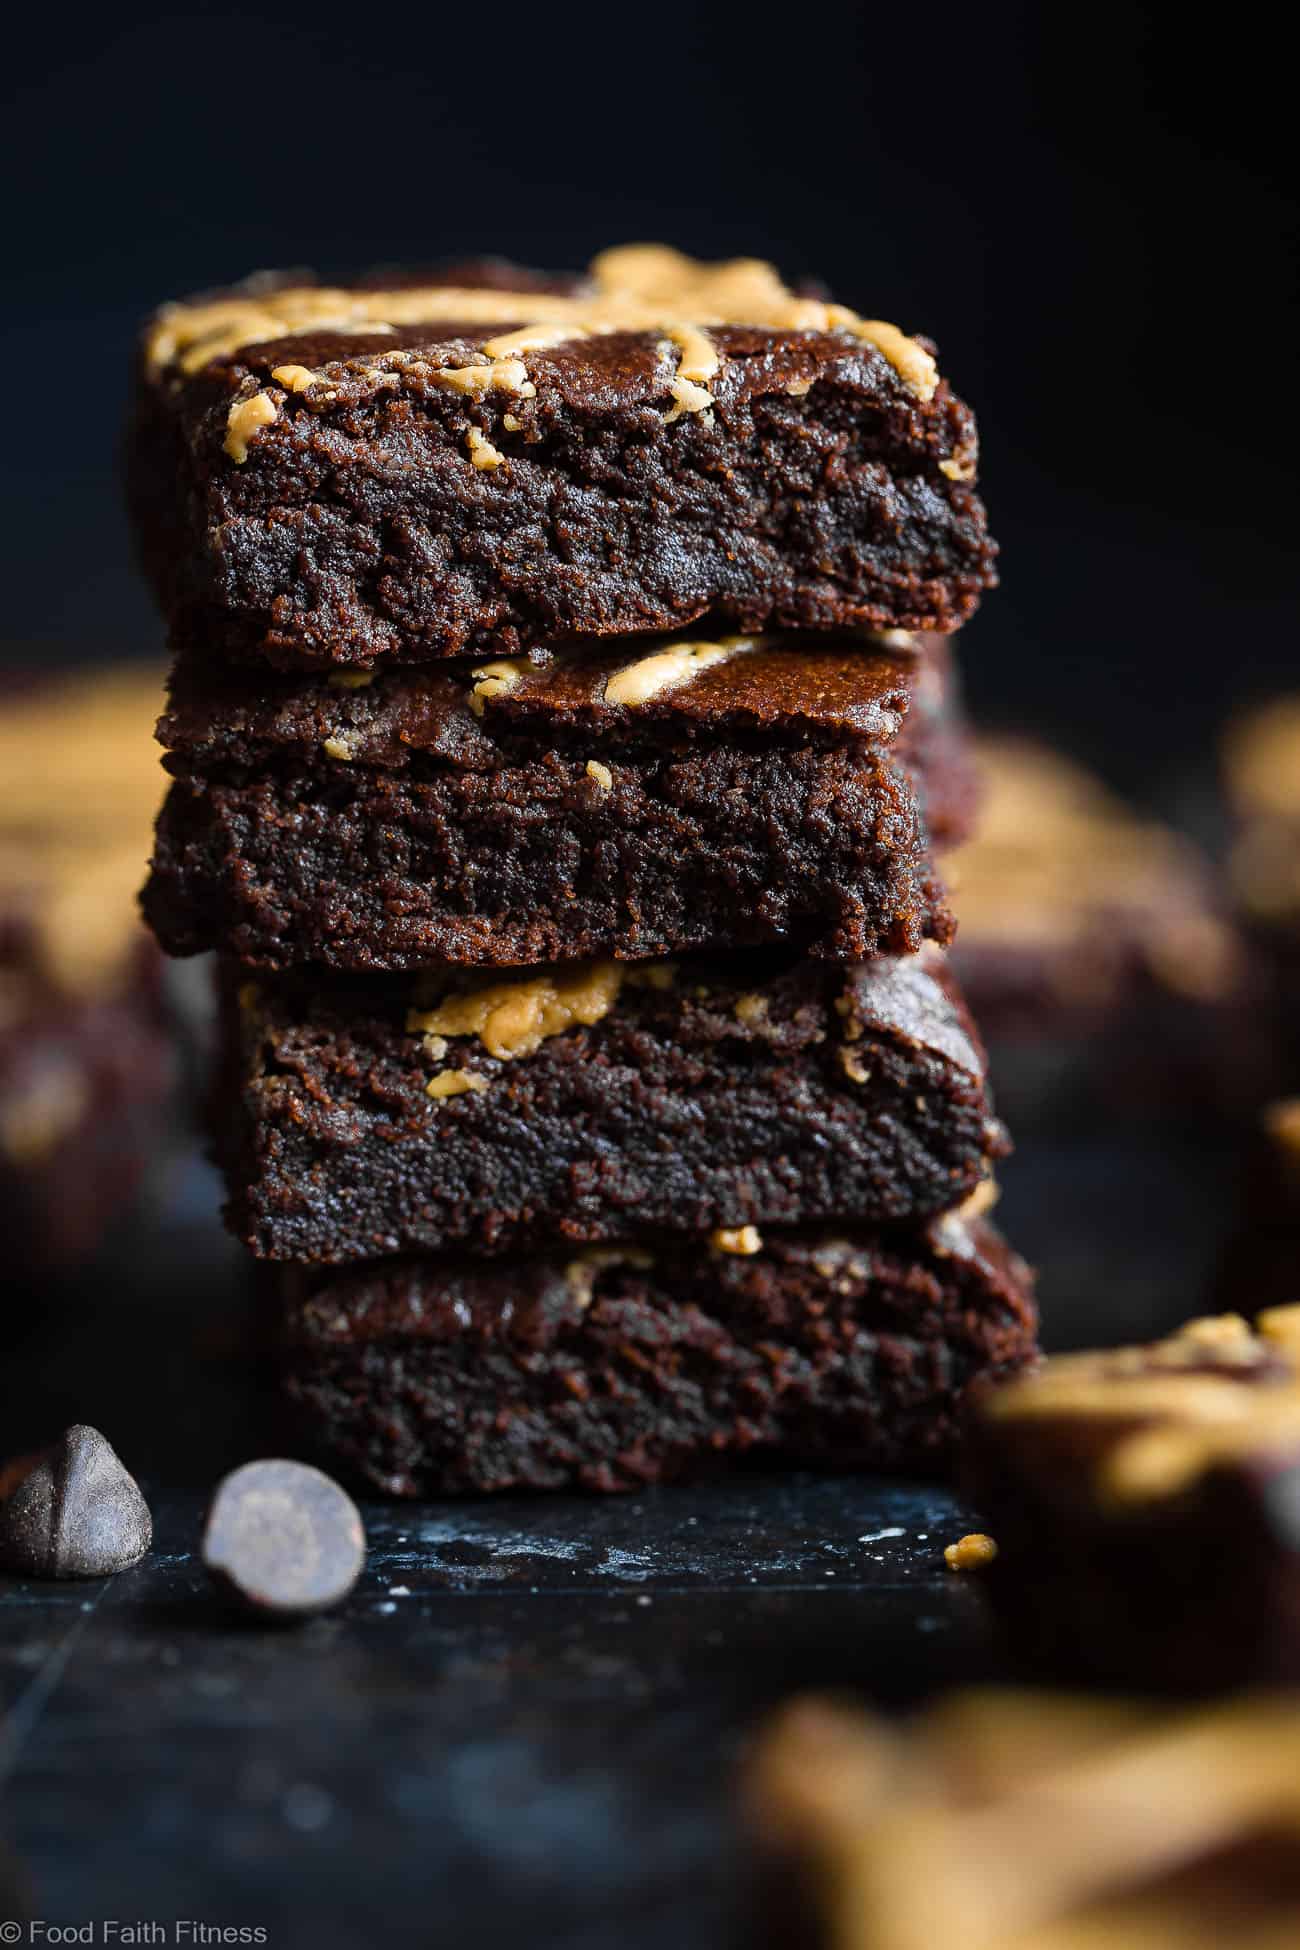 The BEST Paleo Almond Butter Brownies - SO dense, chewy and fudgy that will never believe these are vegan, gluten/grain/dairy/oil free and only 150 calories! Made in one bowl and SO easy! | #Foodfaithfitness | #Paleo #glutenfree #brownies #paleobrownies #almondbutter